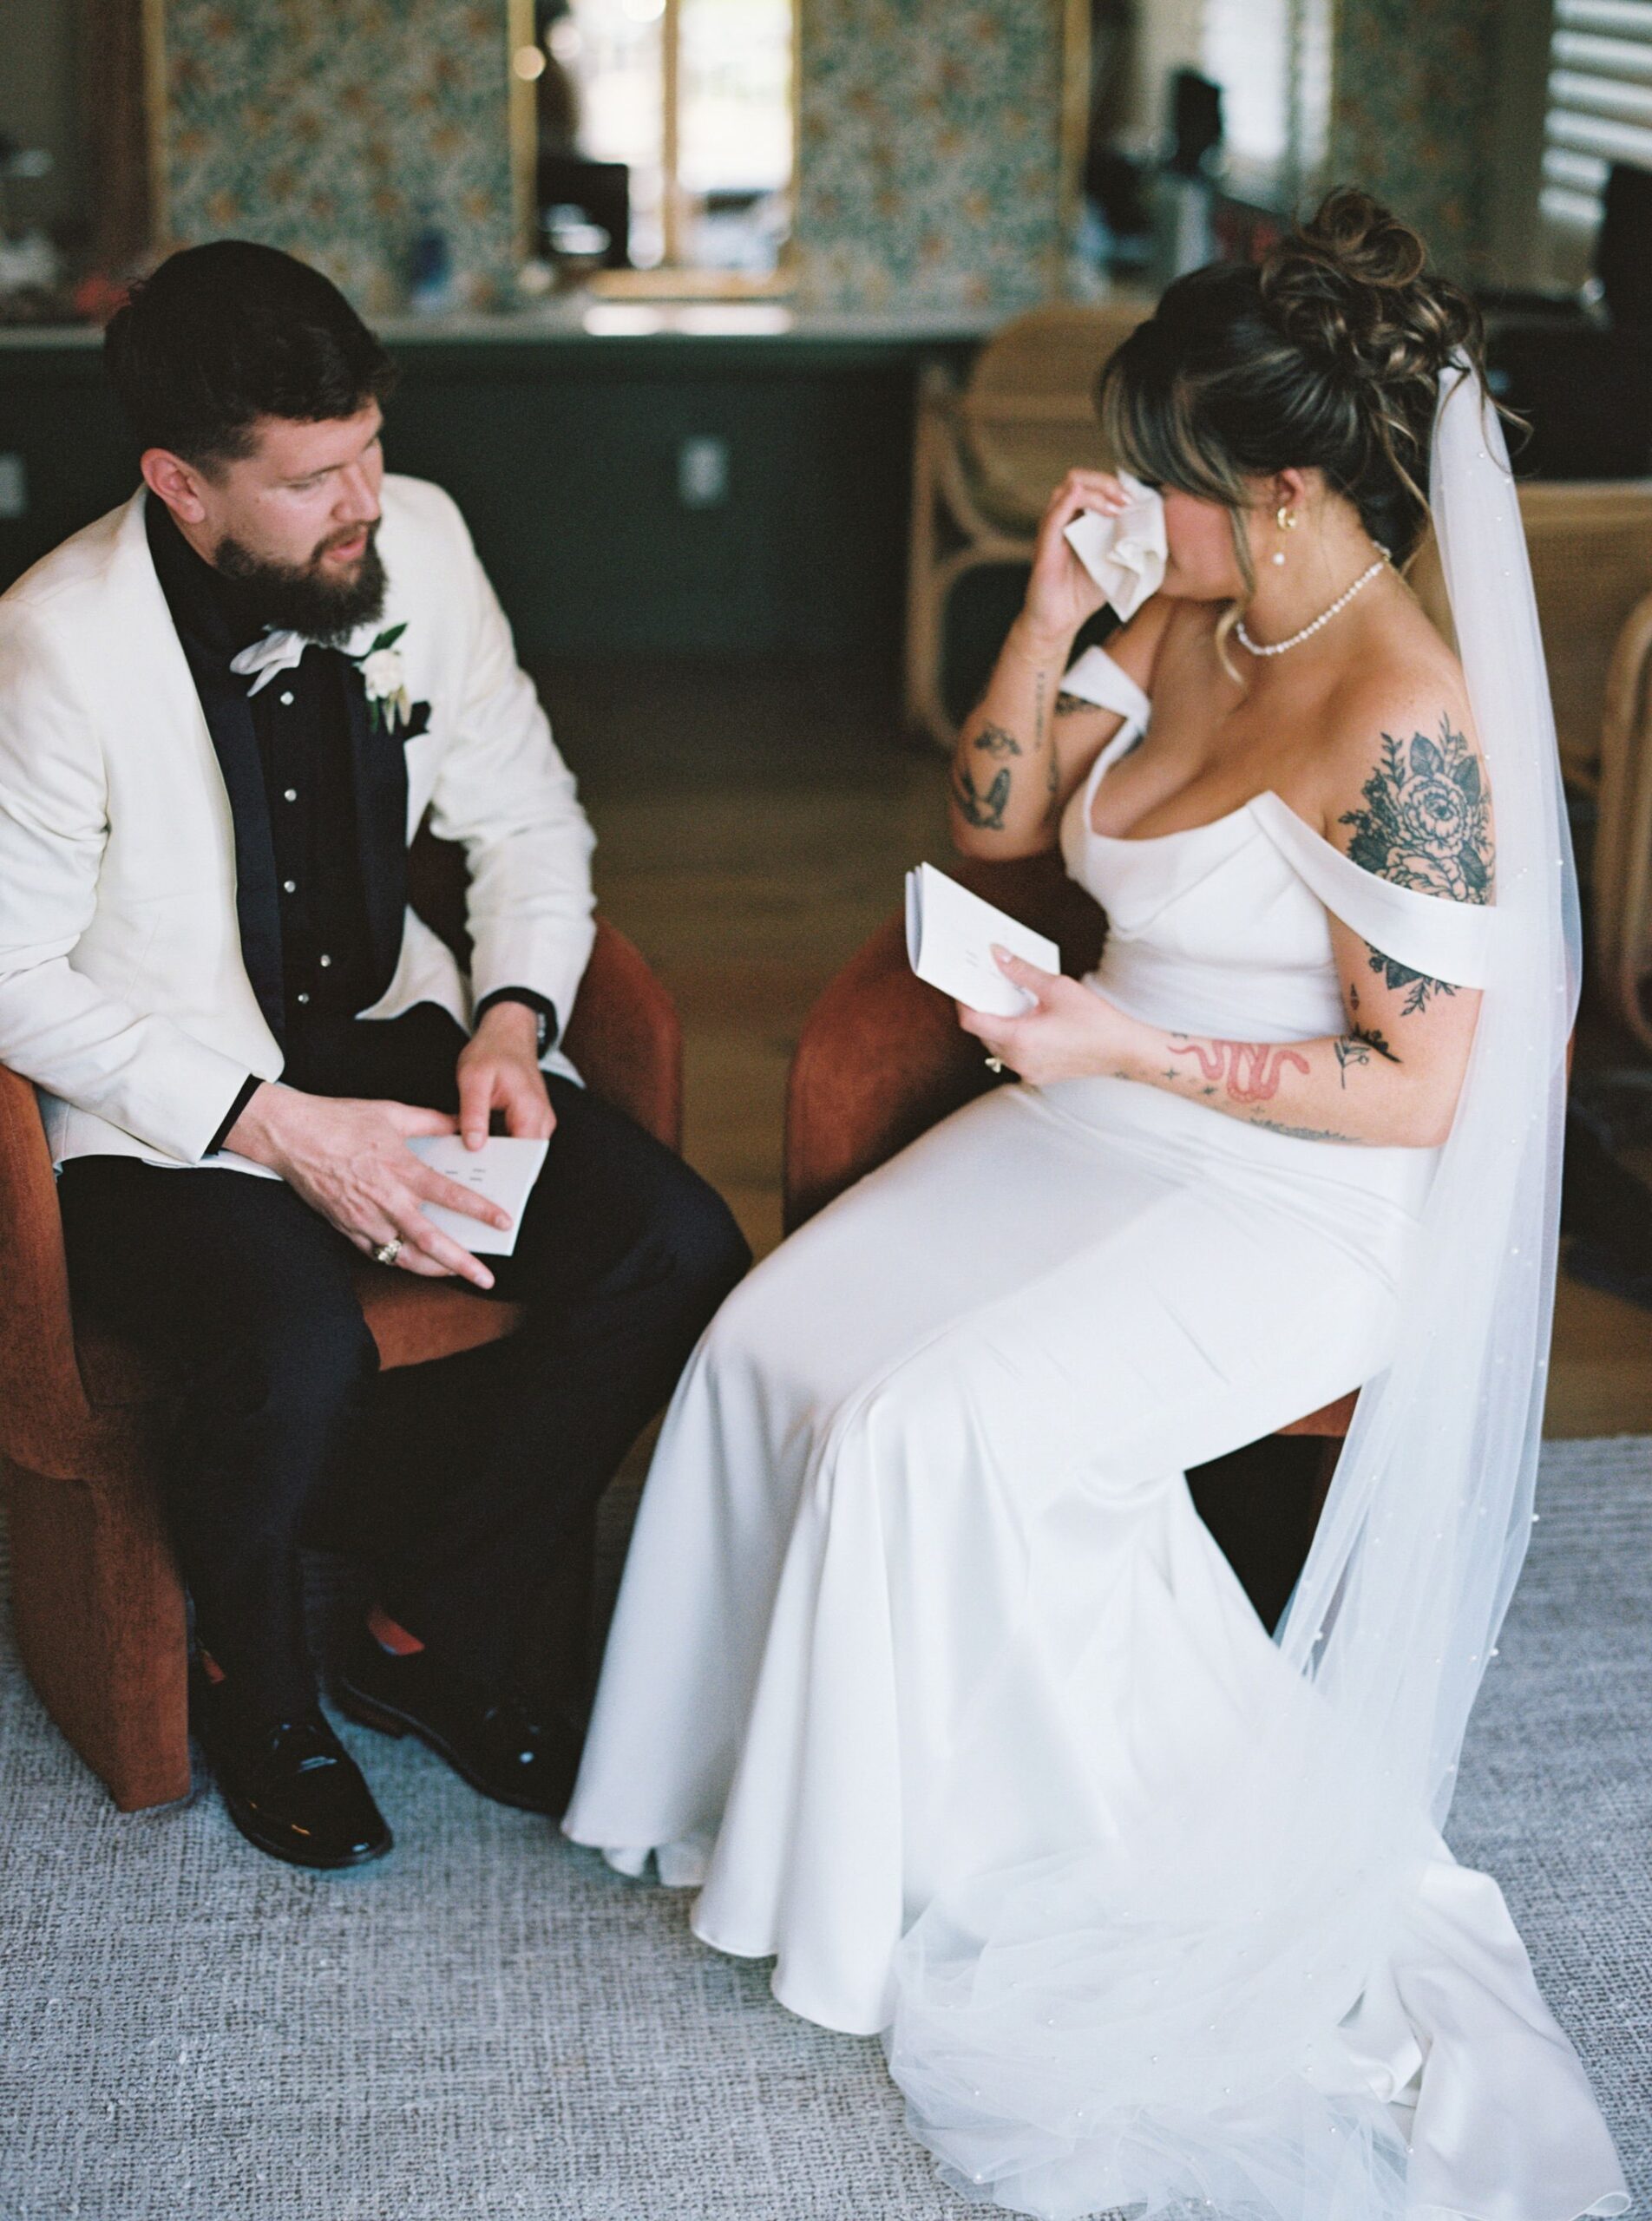 bride wiping tears during a private vow exchange with the groom